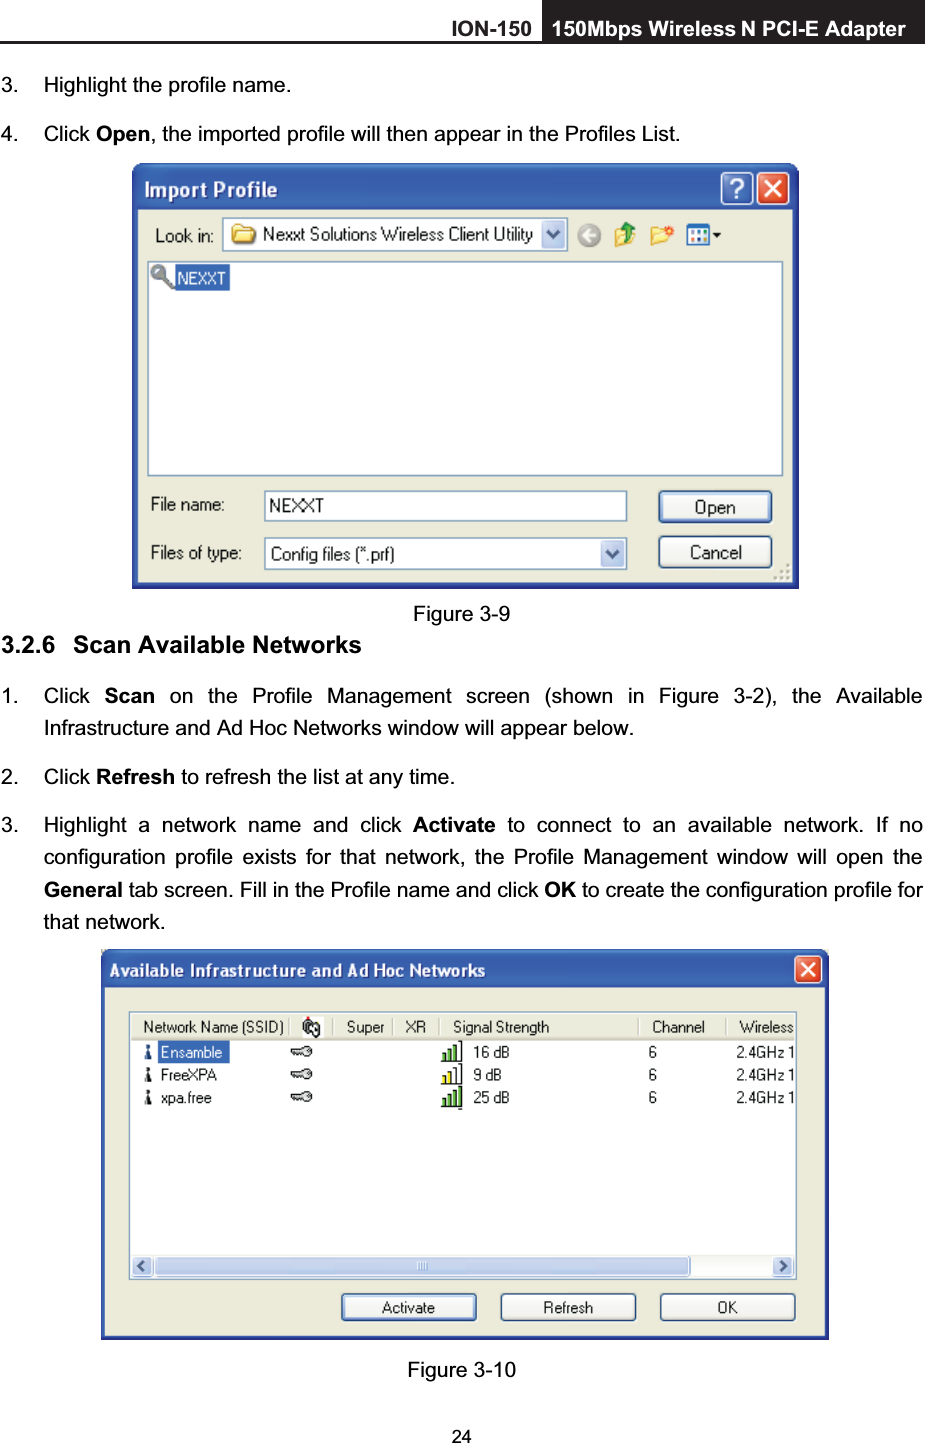 243.  Highlight the profile name. 4. Click Open, the imported profile will then appear in the Profiles List. Figure 3-9 3.2.6 Scan Available Networks 1. Click Scan on the Profile Management screen (shown in Figure 3-2), the Available Infrastructure and Ad Hoc Networks window will appear below. 2. Click Refresh to refresh the list at any time. 3.  Highlight a network name and click Activate to connect to an available network. If no configuration profile exists for that network, the Profile Management window will open the General tab screen. Fill in the Profile name and click OK to create the configuration profile for that network. Figure 3-10 ION-150 150Mbps Wireless  N PCI-E Adapter